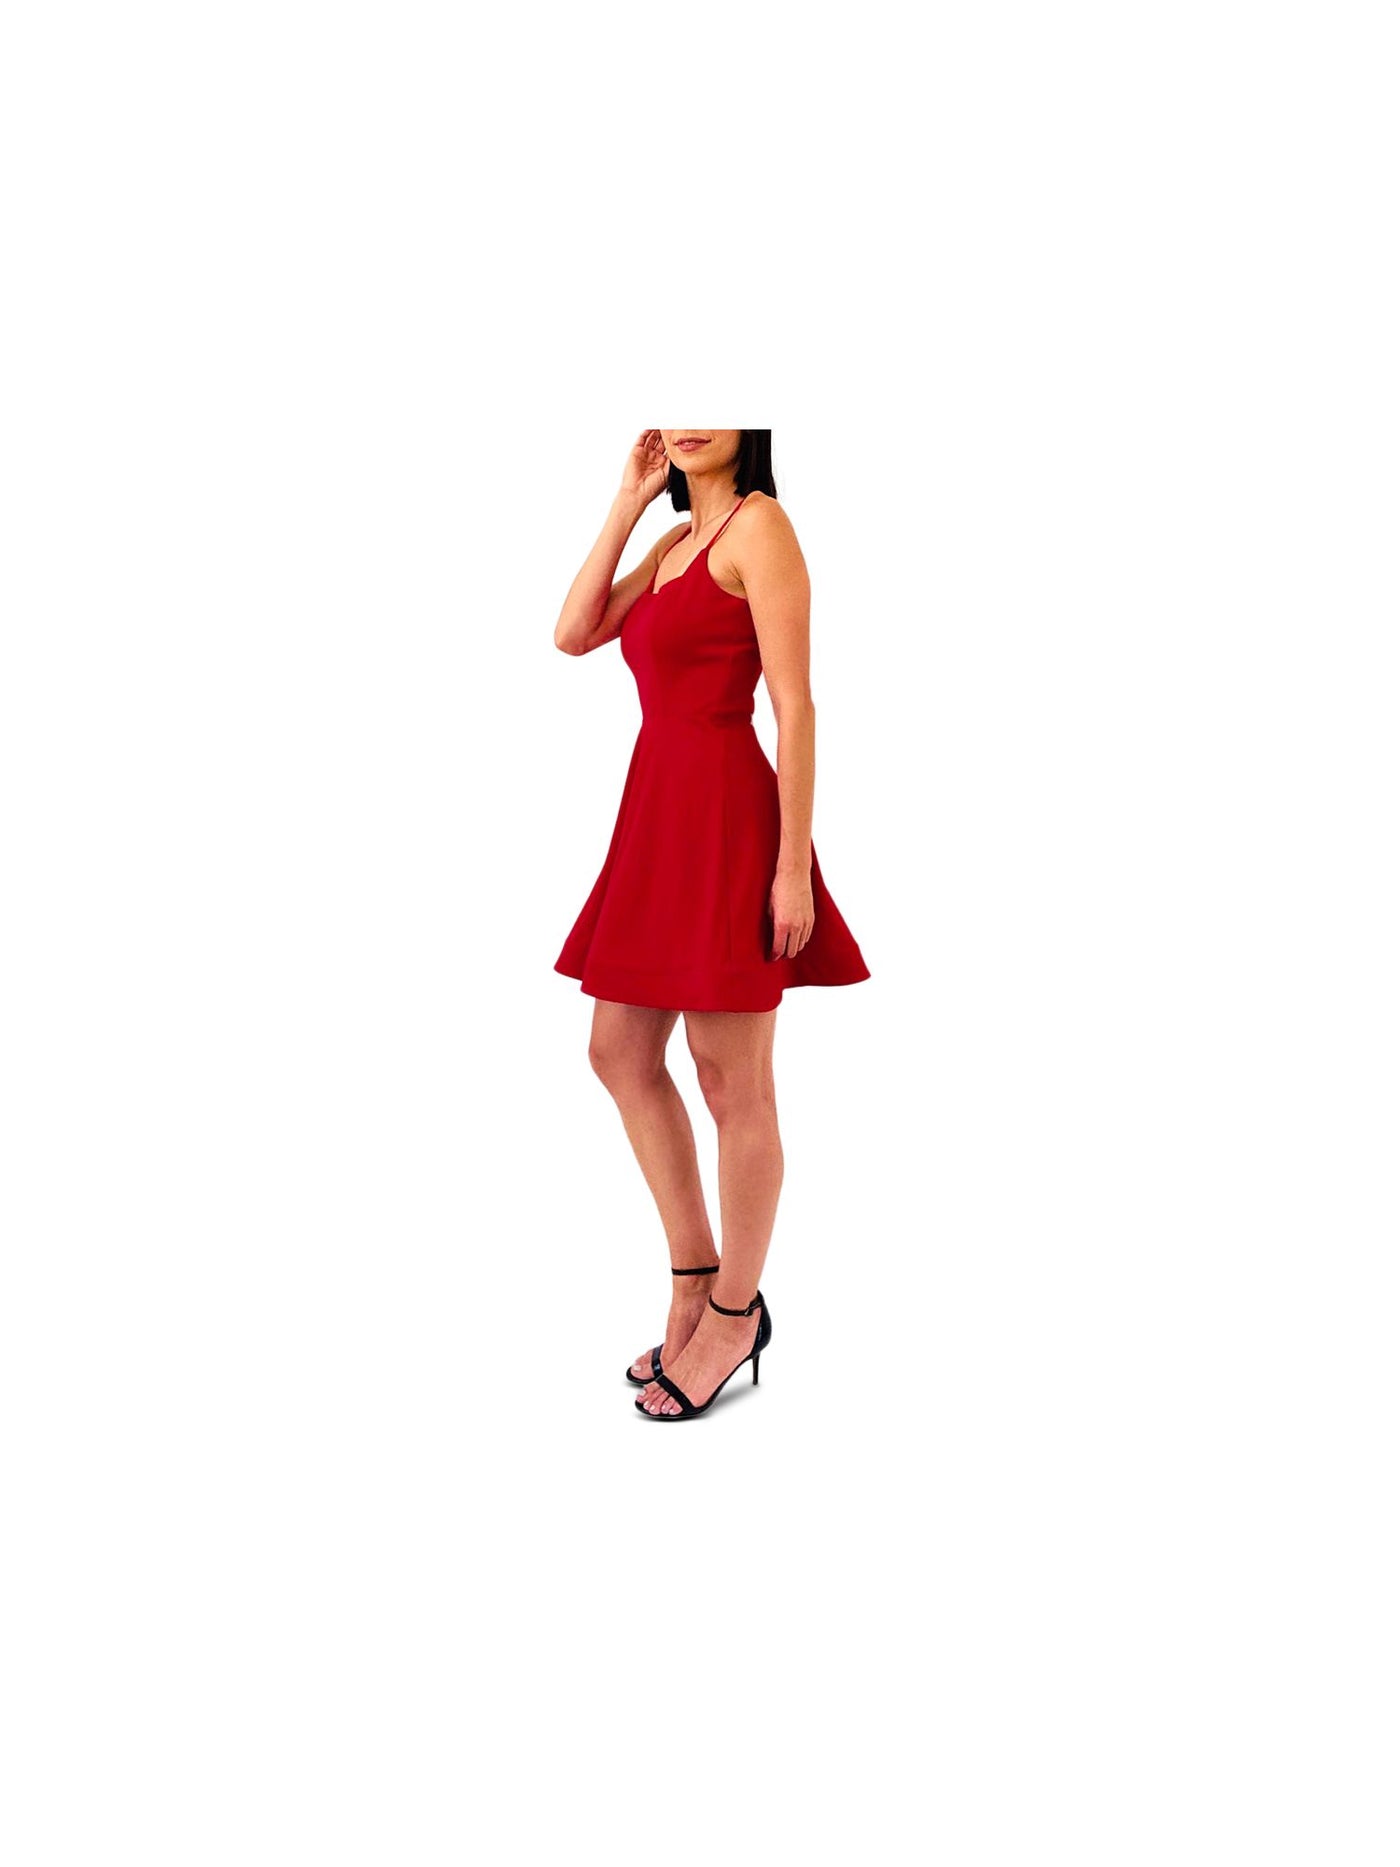 TRIXXI Womens Red Cut Out Spaghetti Strap Square Neck Short Party Fit + Flare Dress Juniors 11